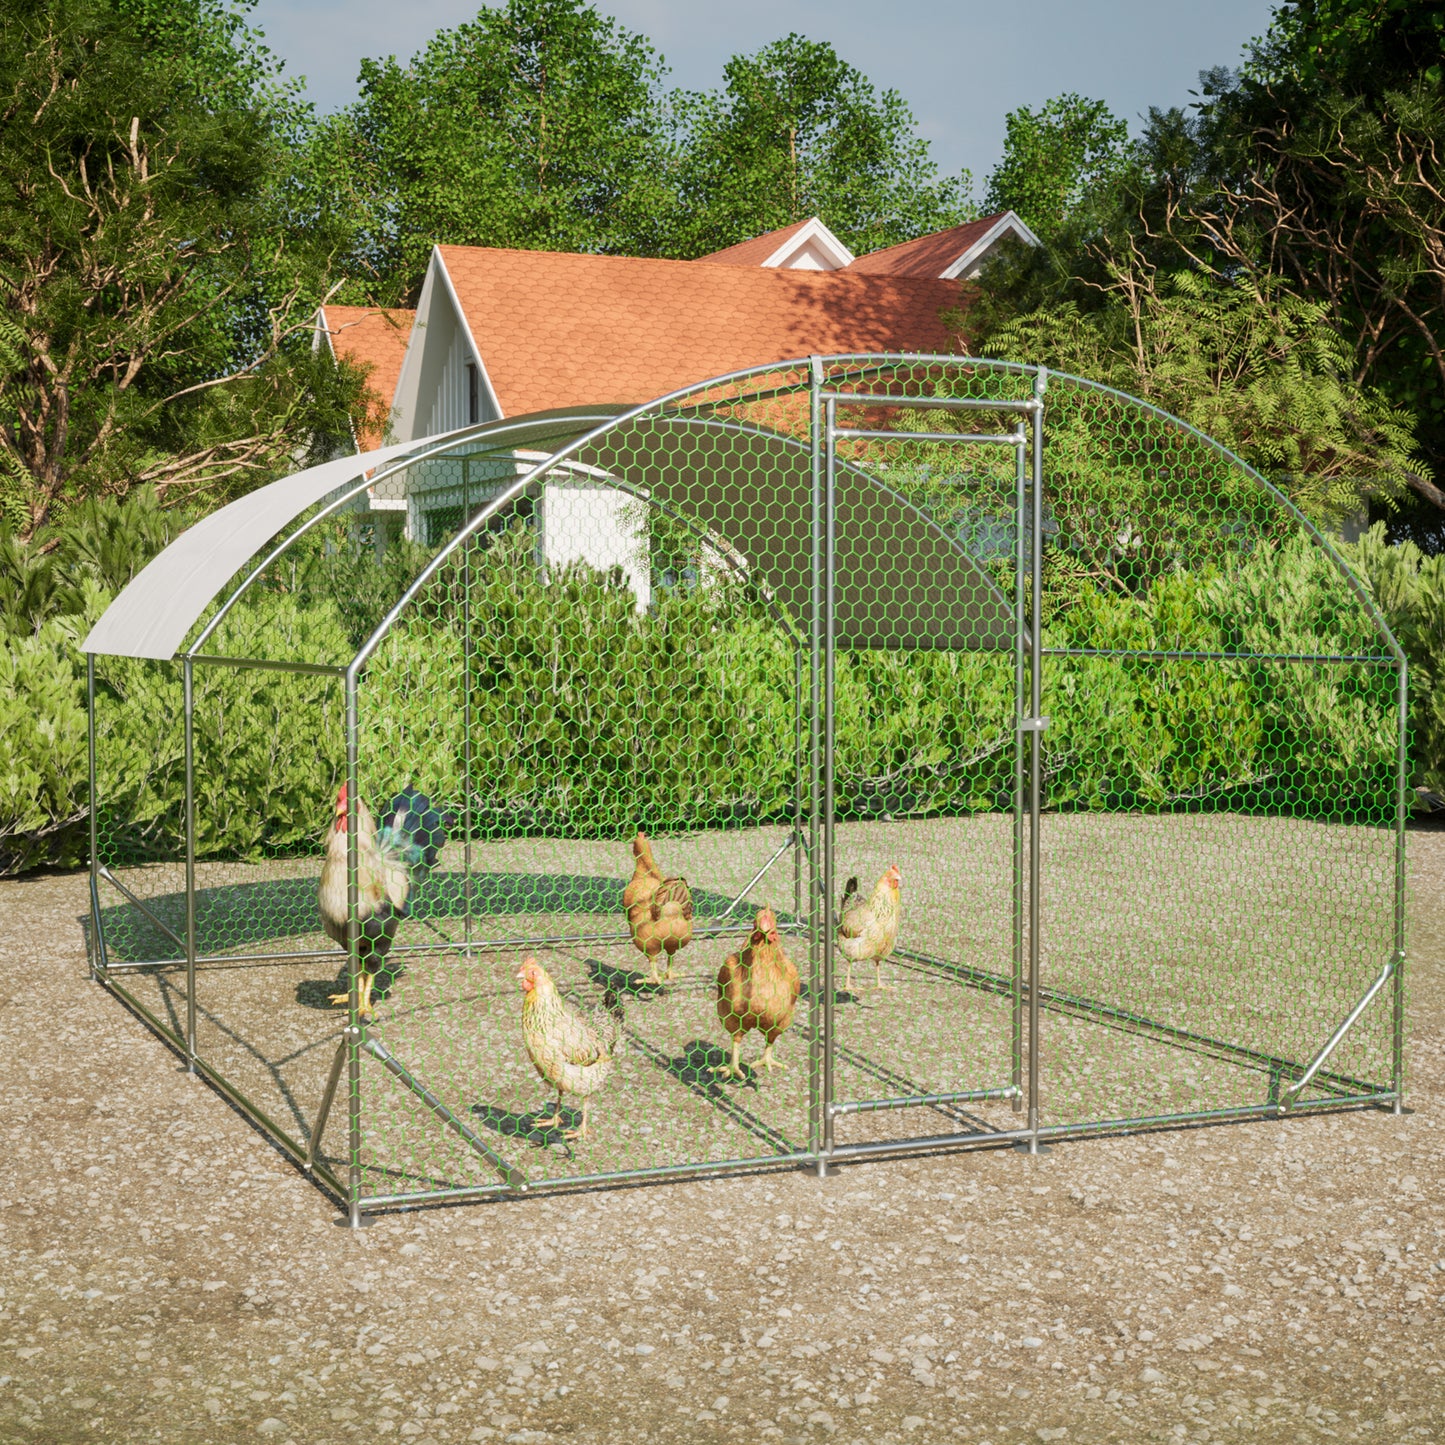 Large Chicken Coop Metal Chicken Run with Waterproof and Anti-UV Cover, Dome Shaped Walk-in Fence Cage Hen House for Outdoor and Yard Farm Use, 1" Tube Diameter, 9.84' x 13.12' x 6.56'